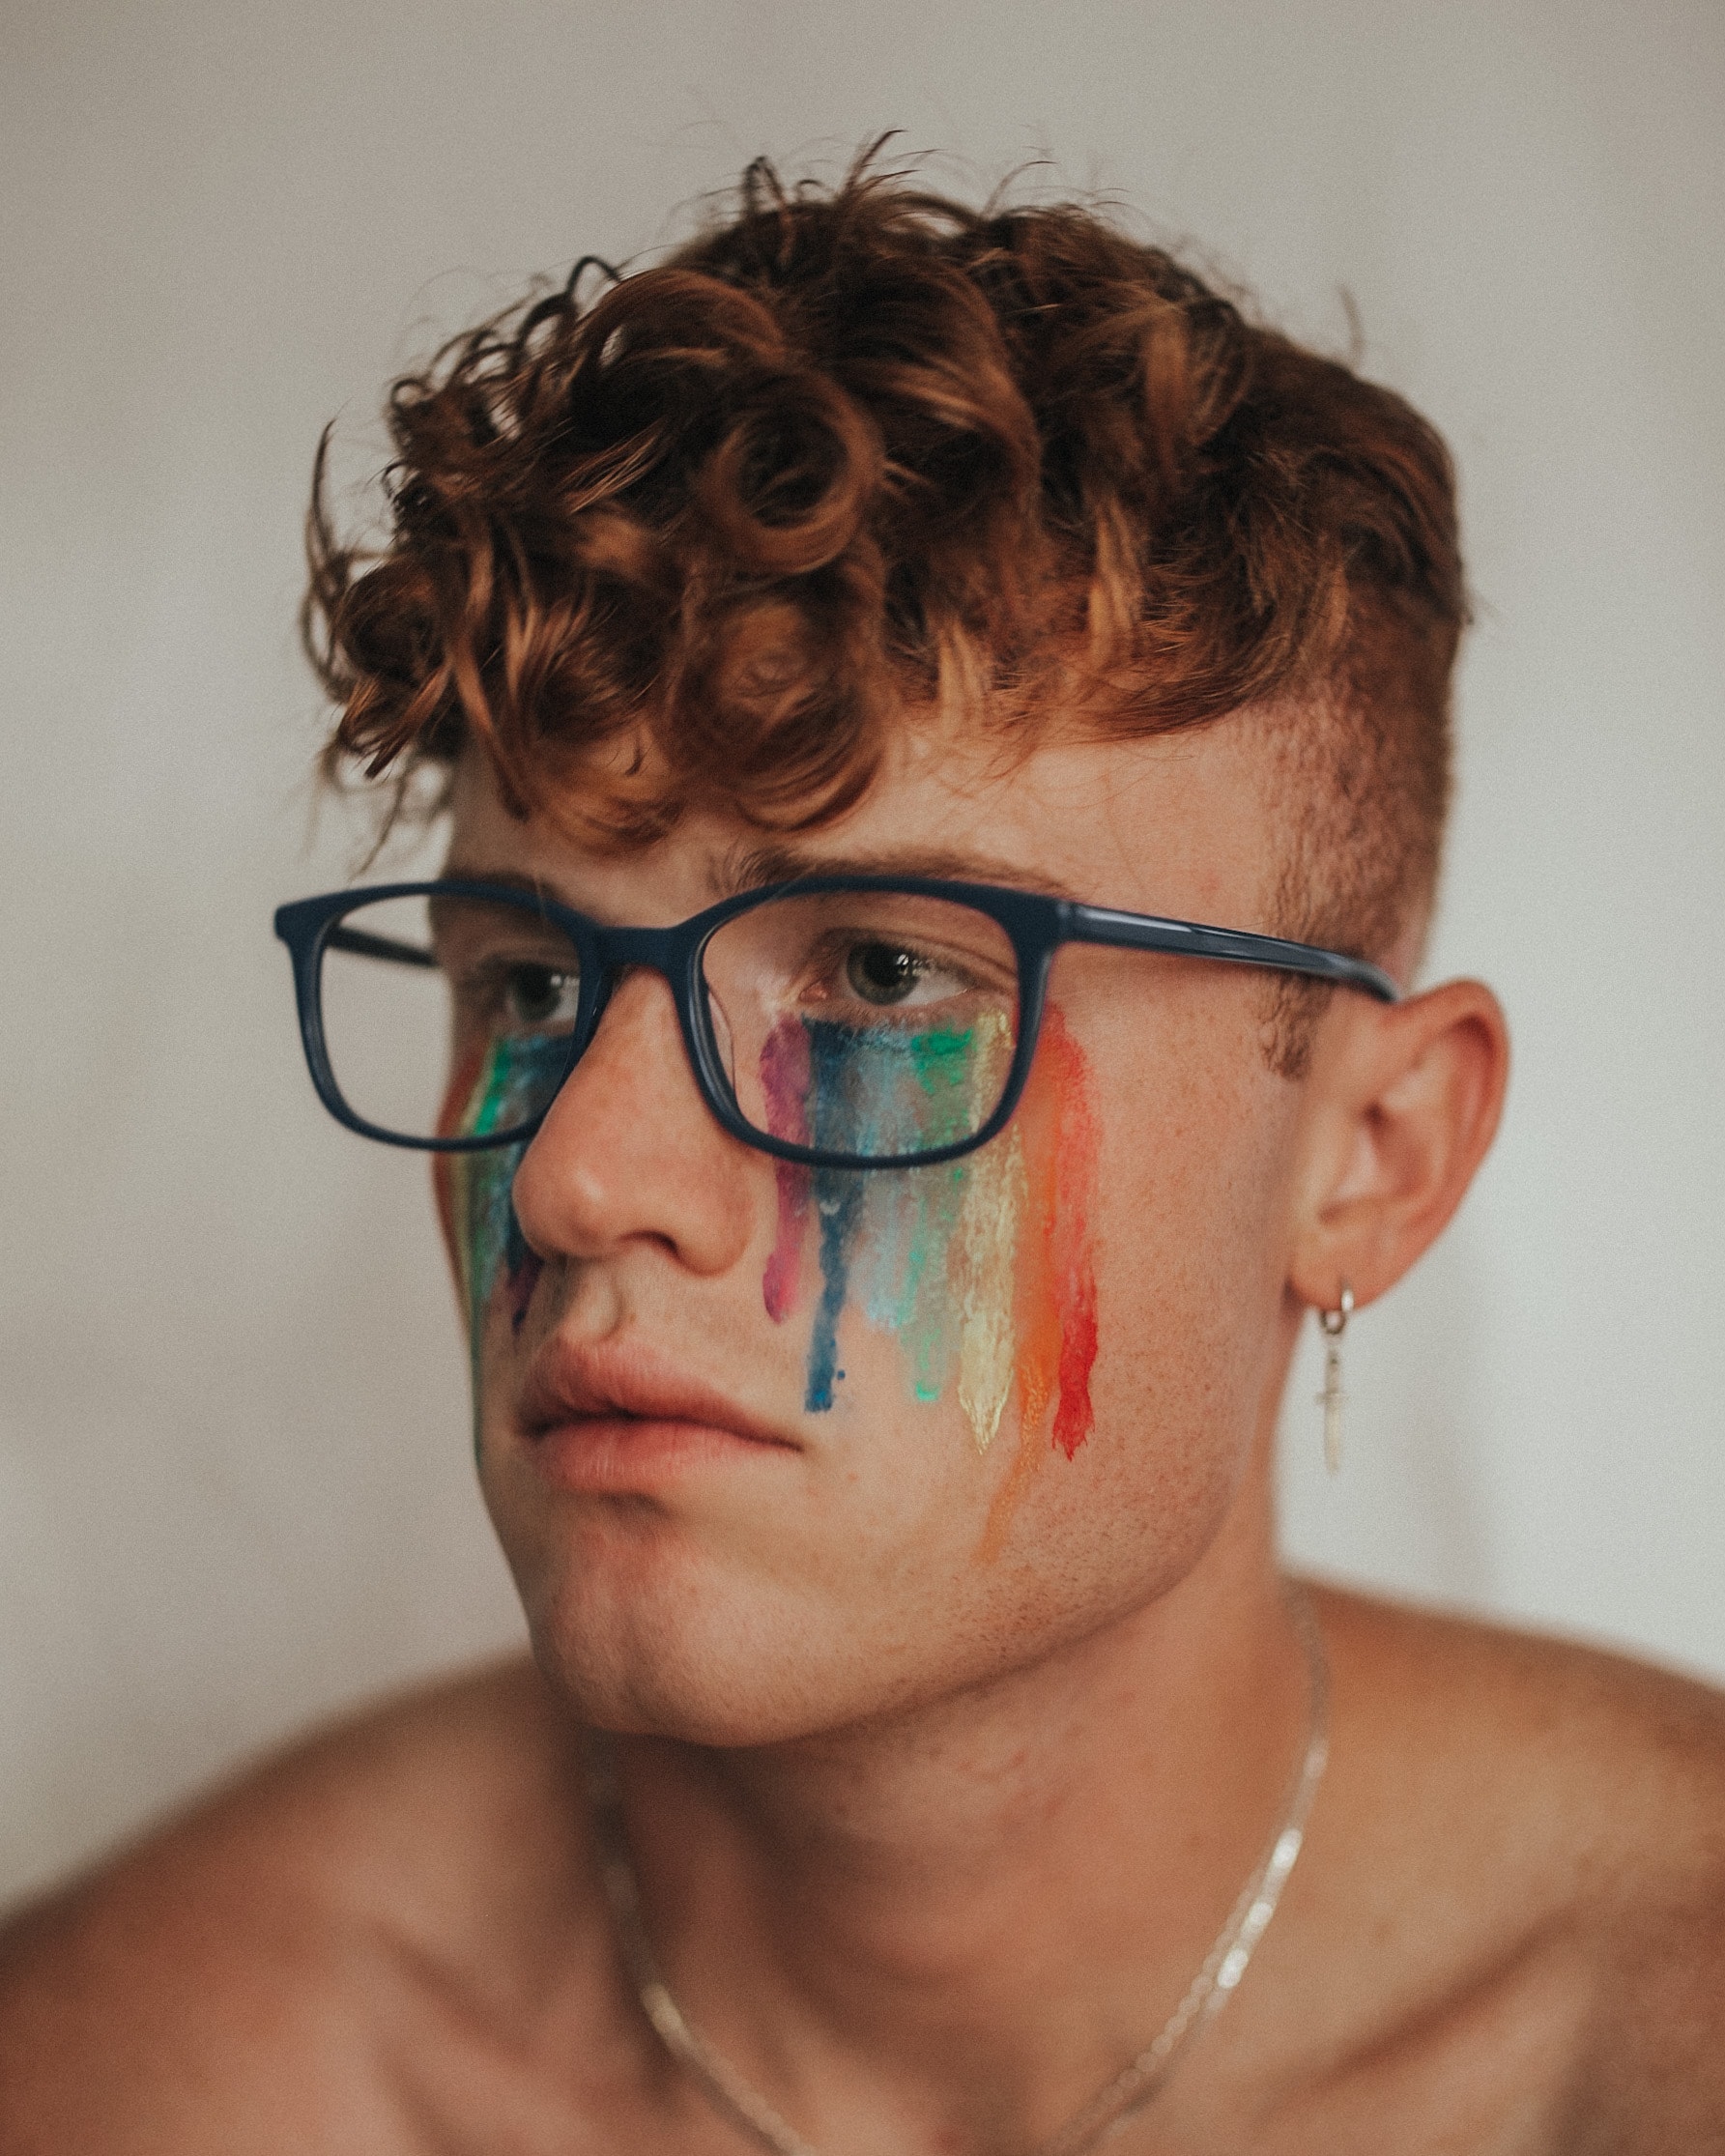 A person wearing glasses with rainbow paint on their face